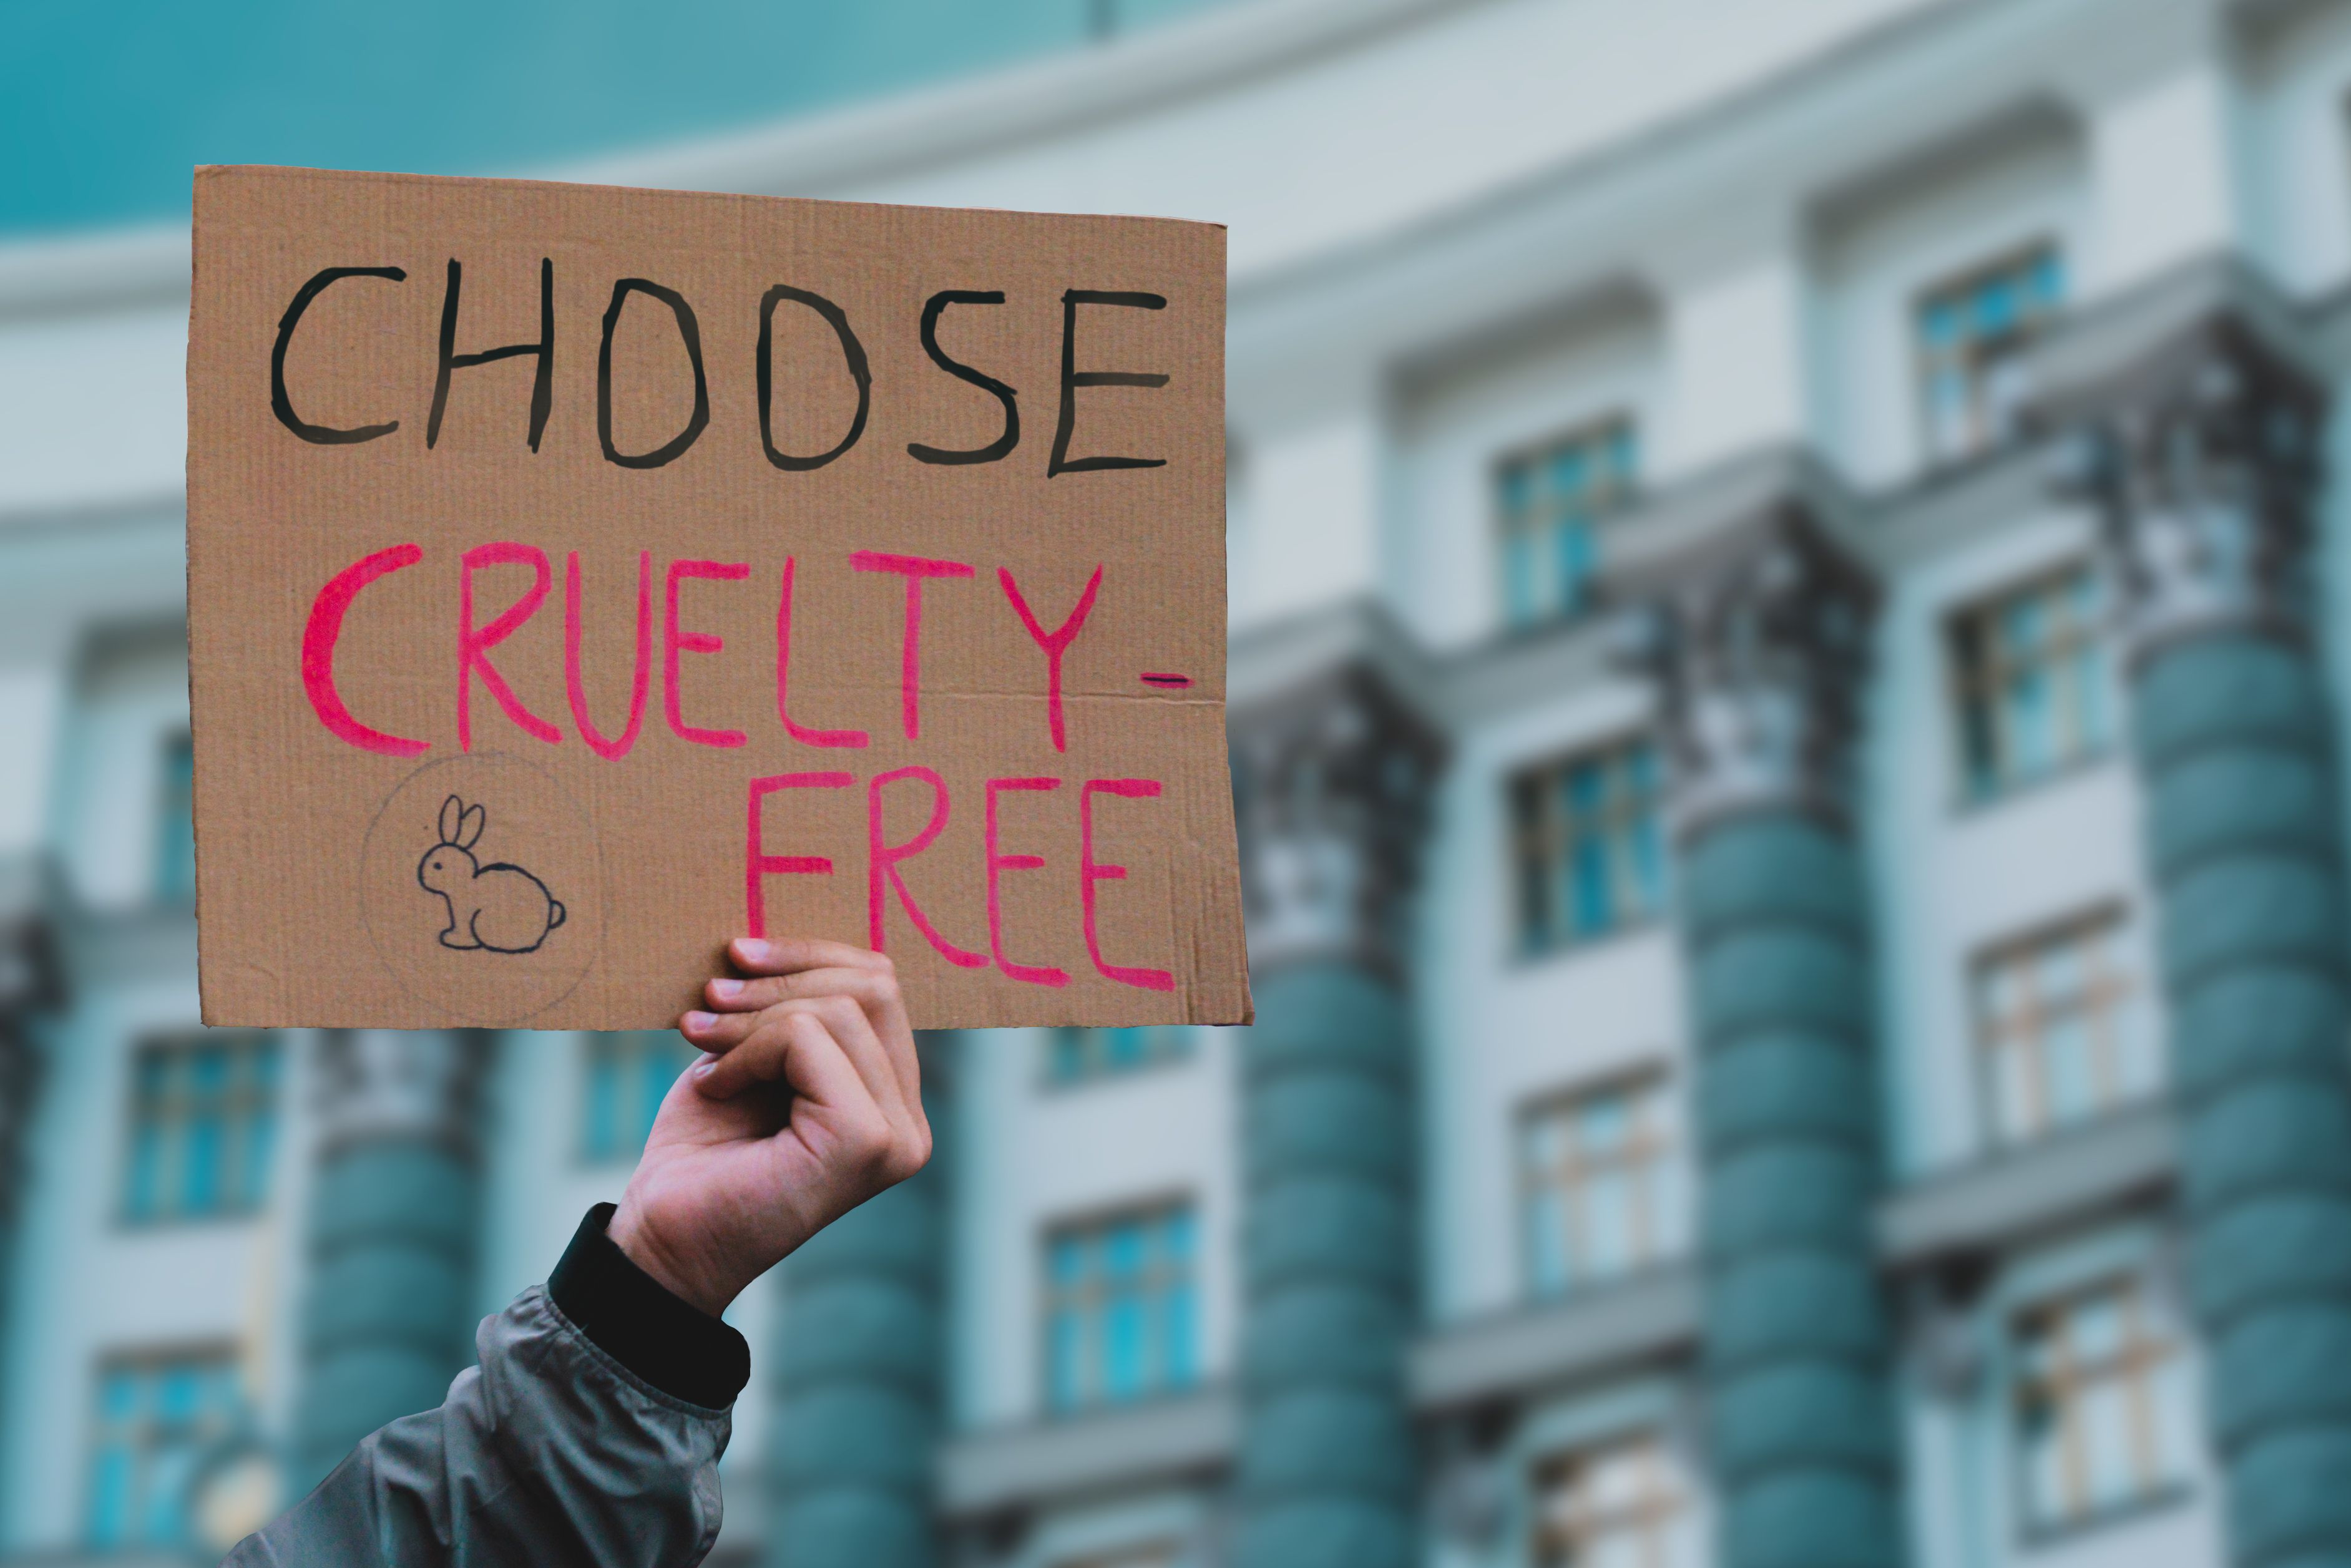 Hand holding a cruelty-free placard